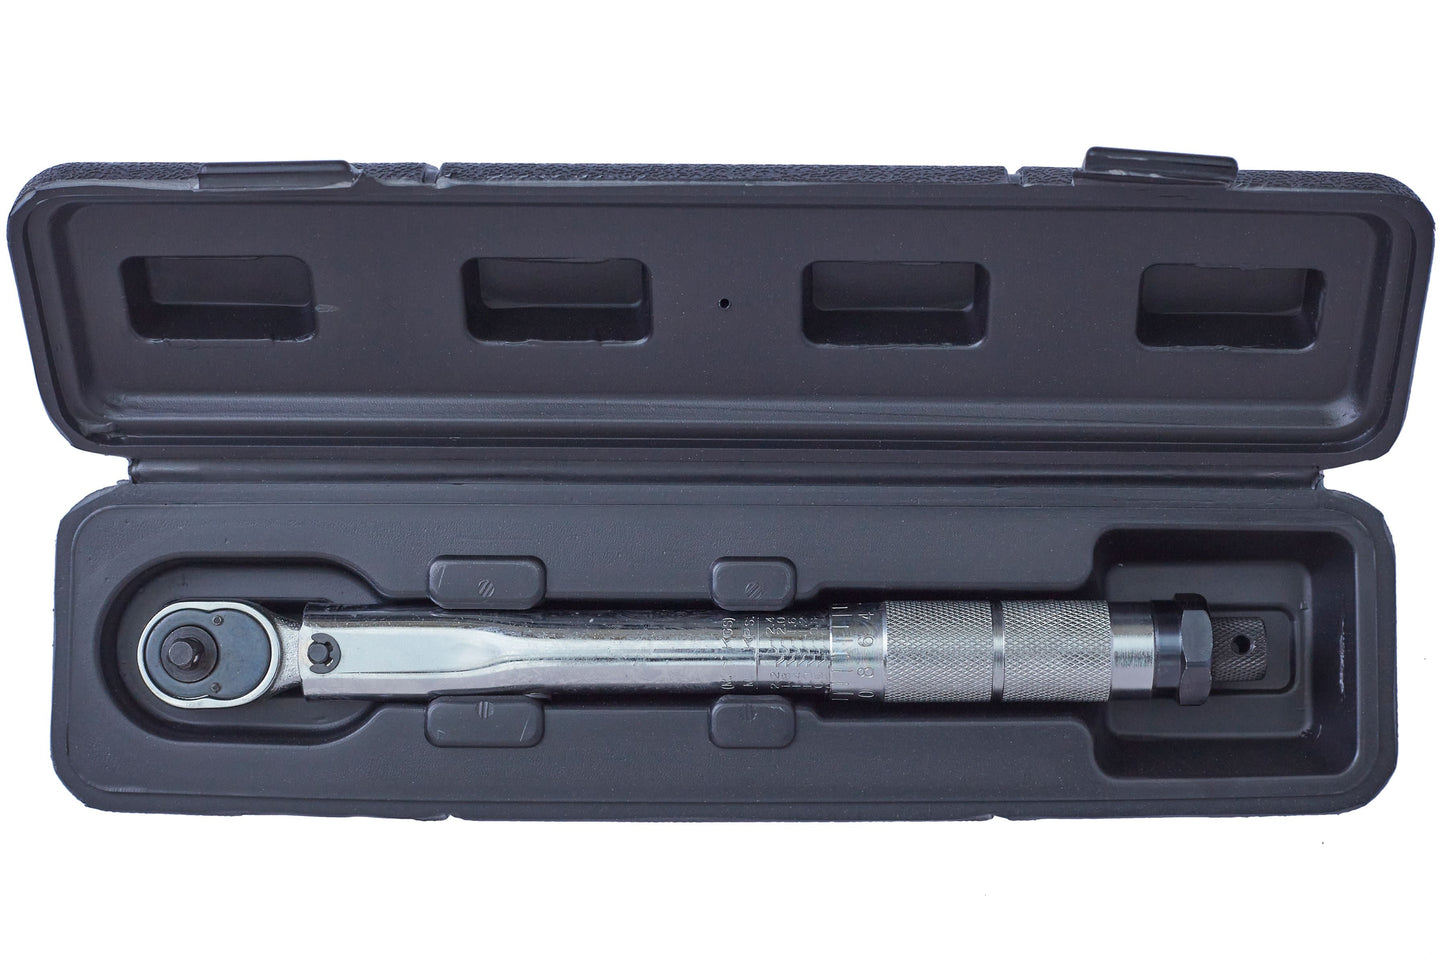 1/4" TORQUE WRENCH